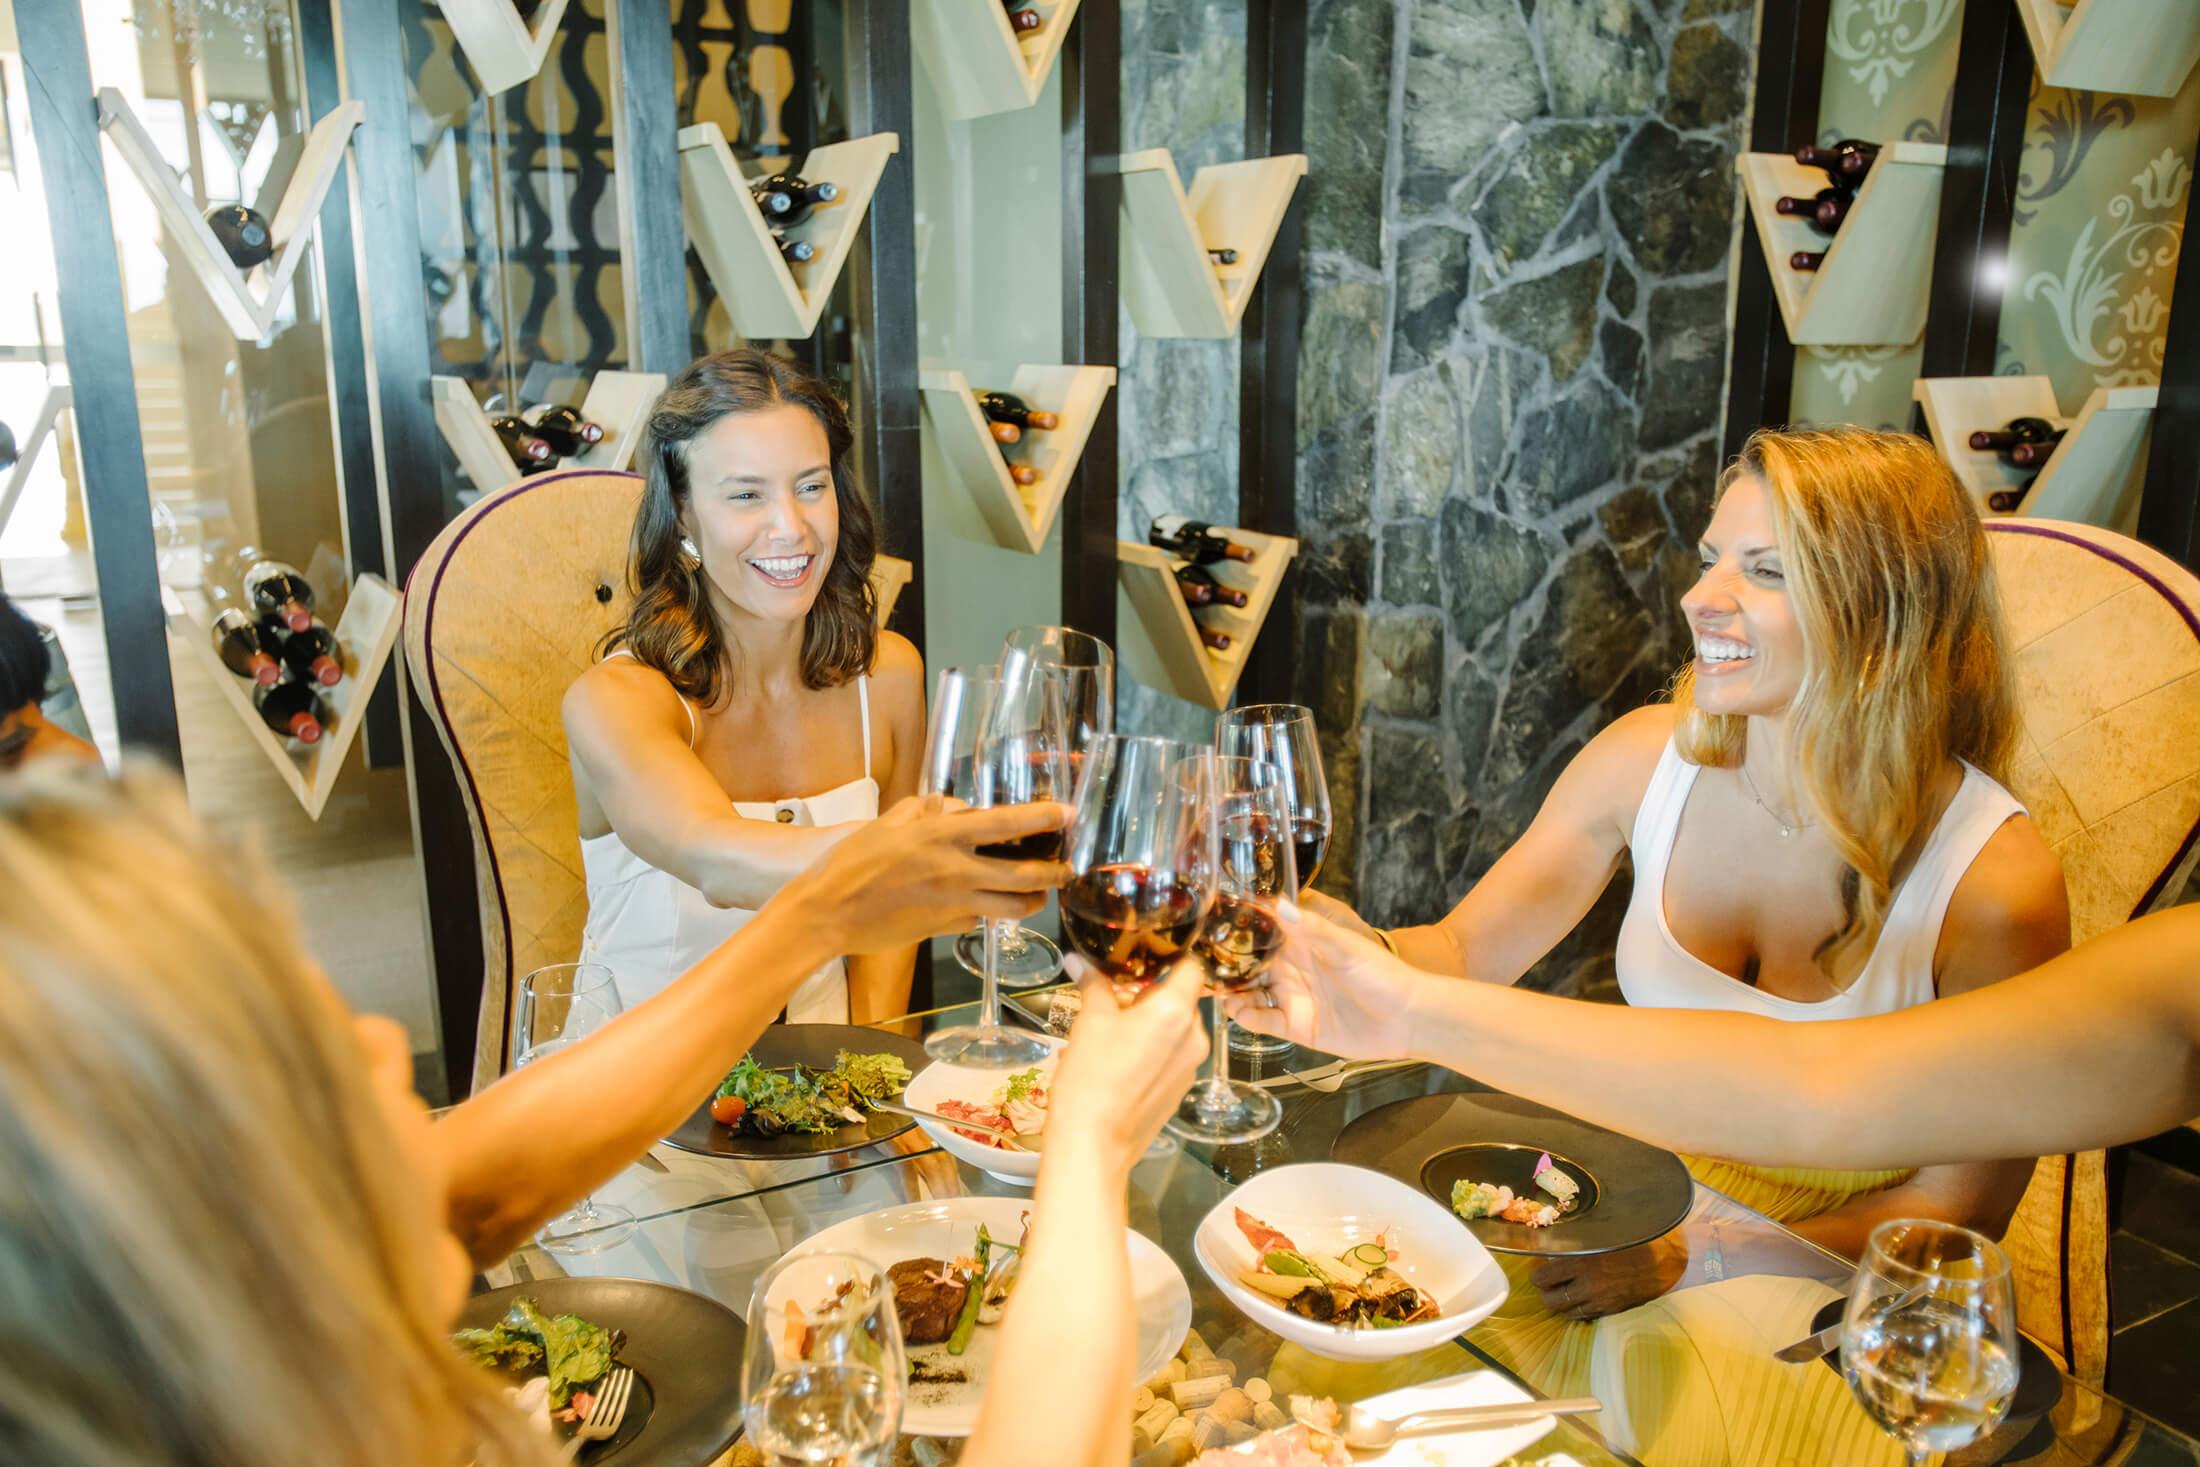 Women toasting at a restaurant table